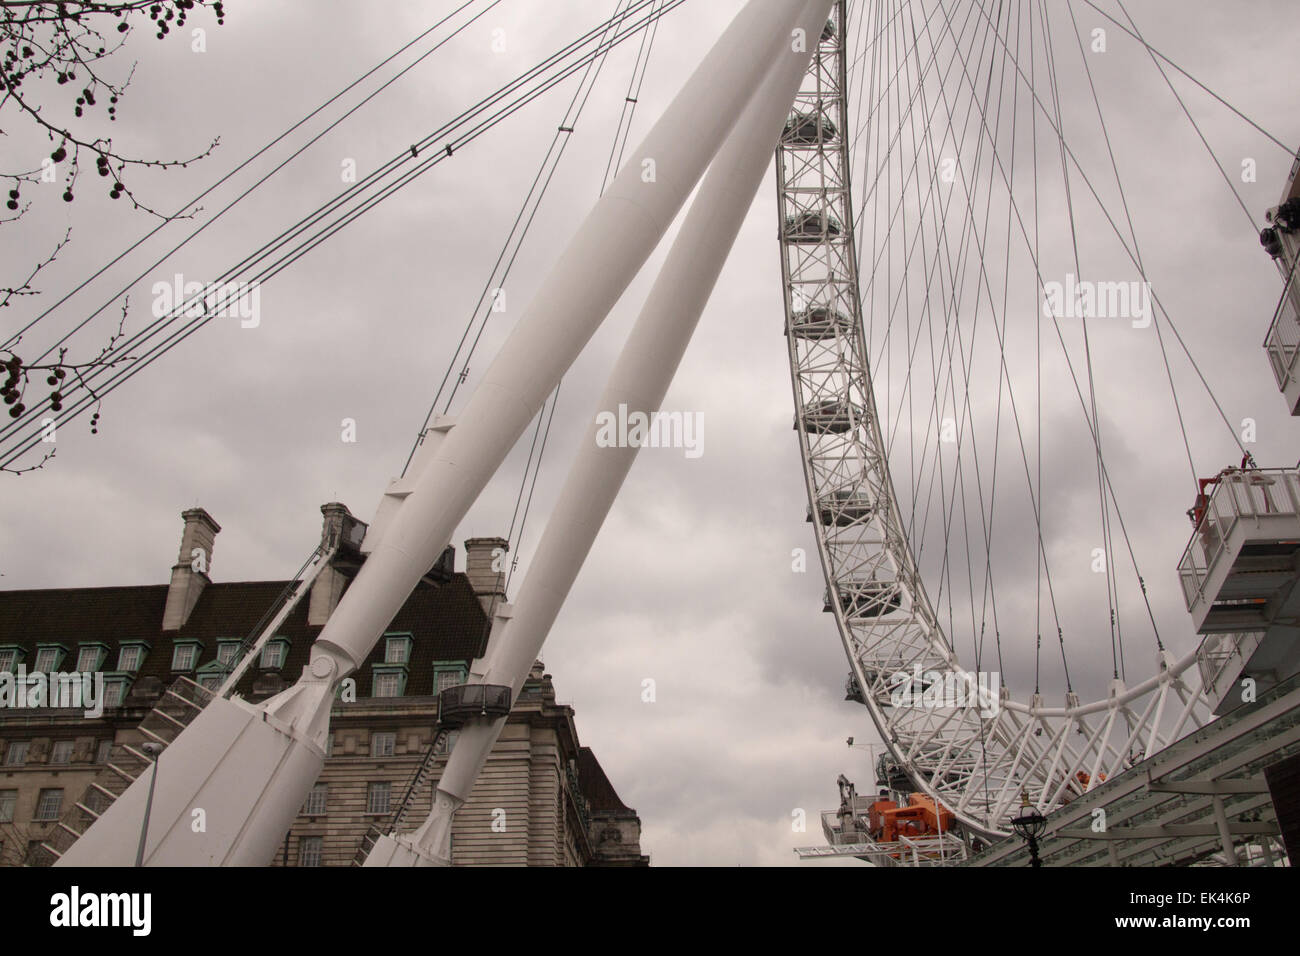 View of the London Eye showing the supporting structure and passenger capsules Stock Photo